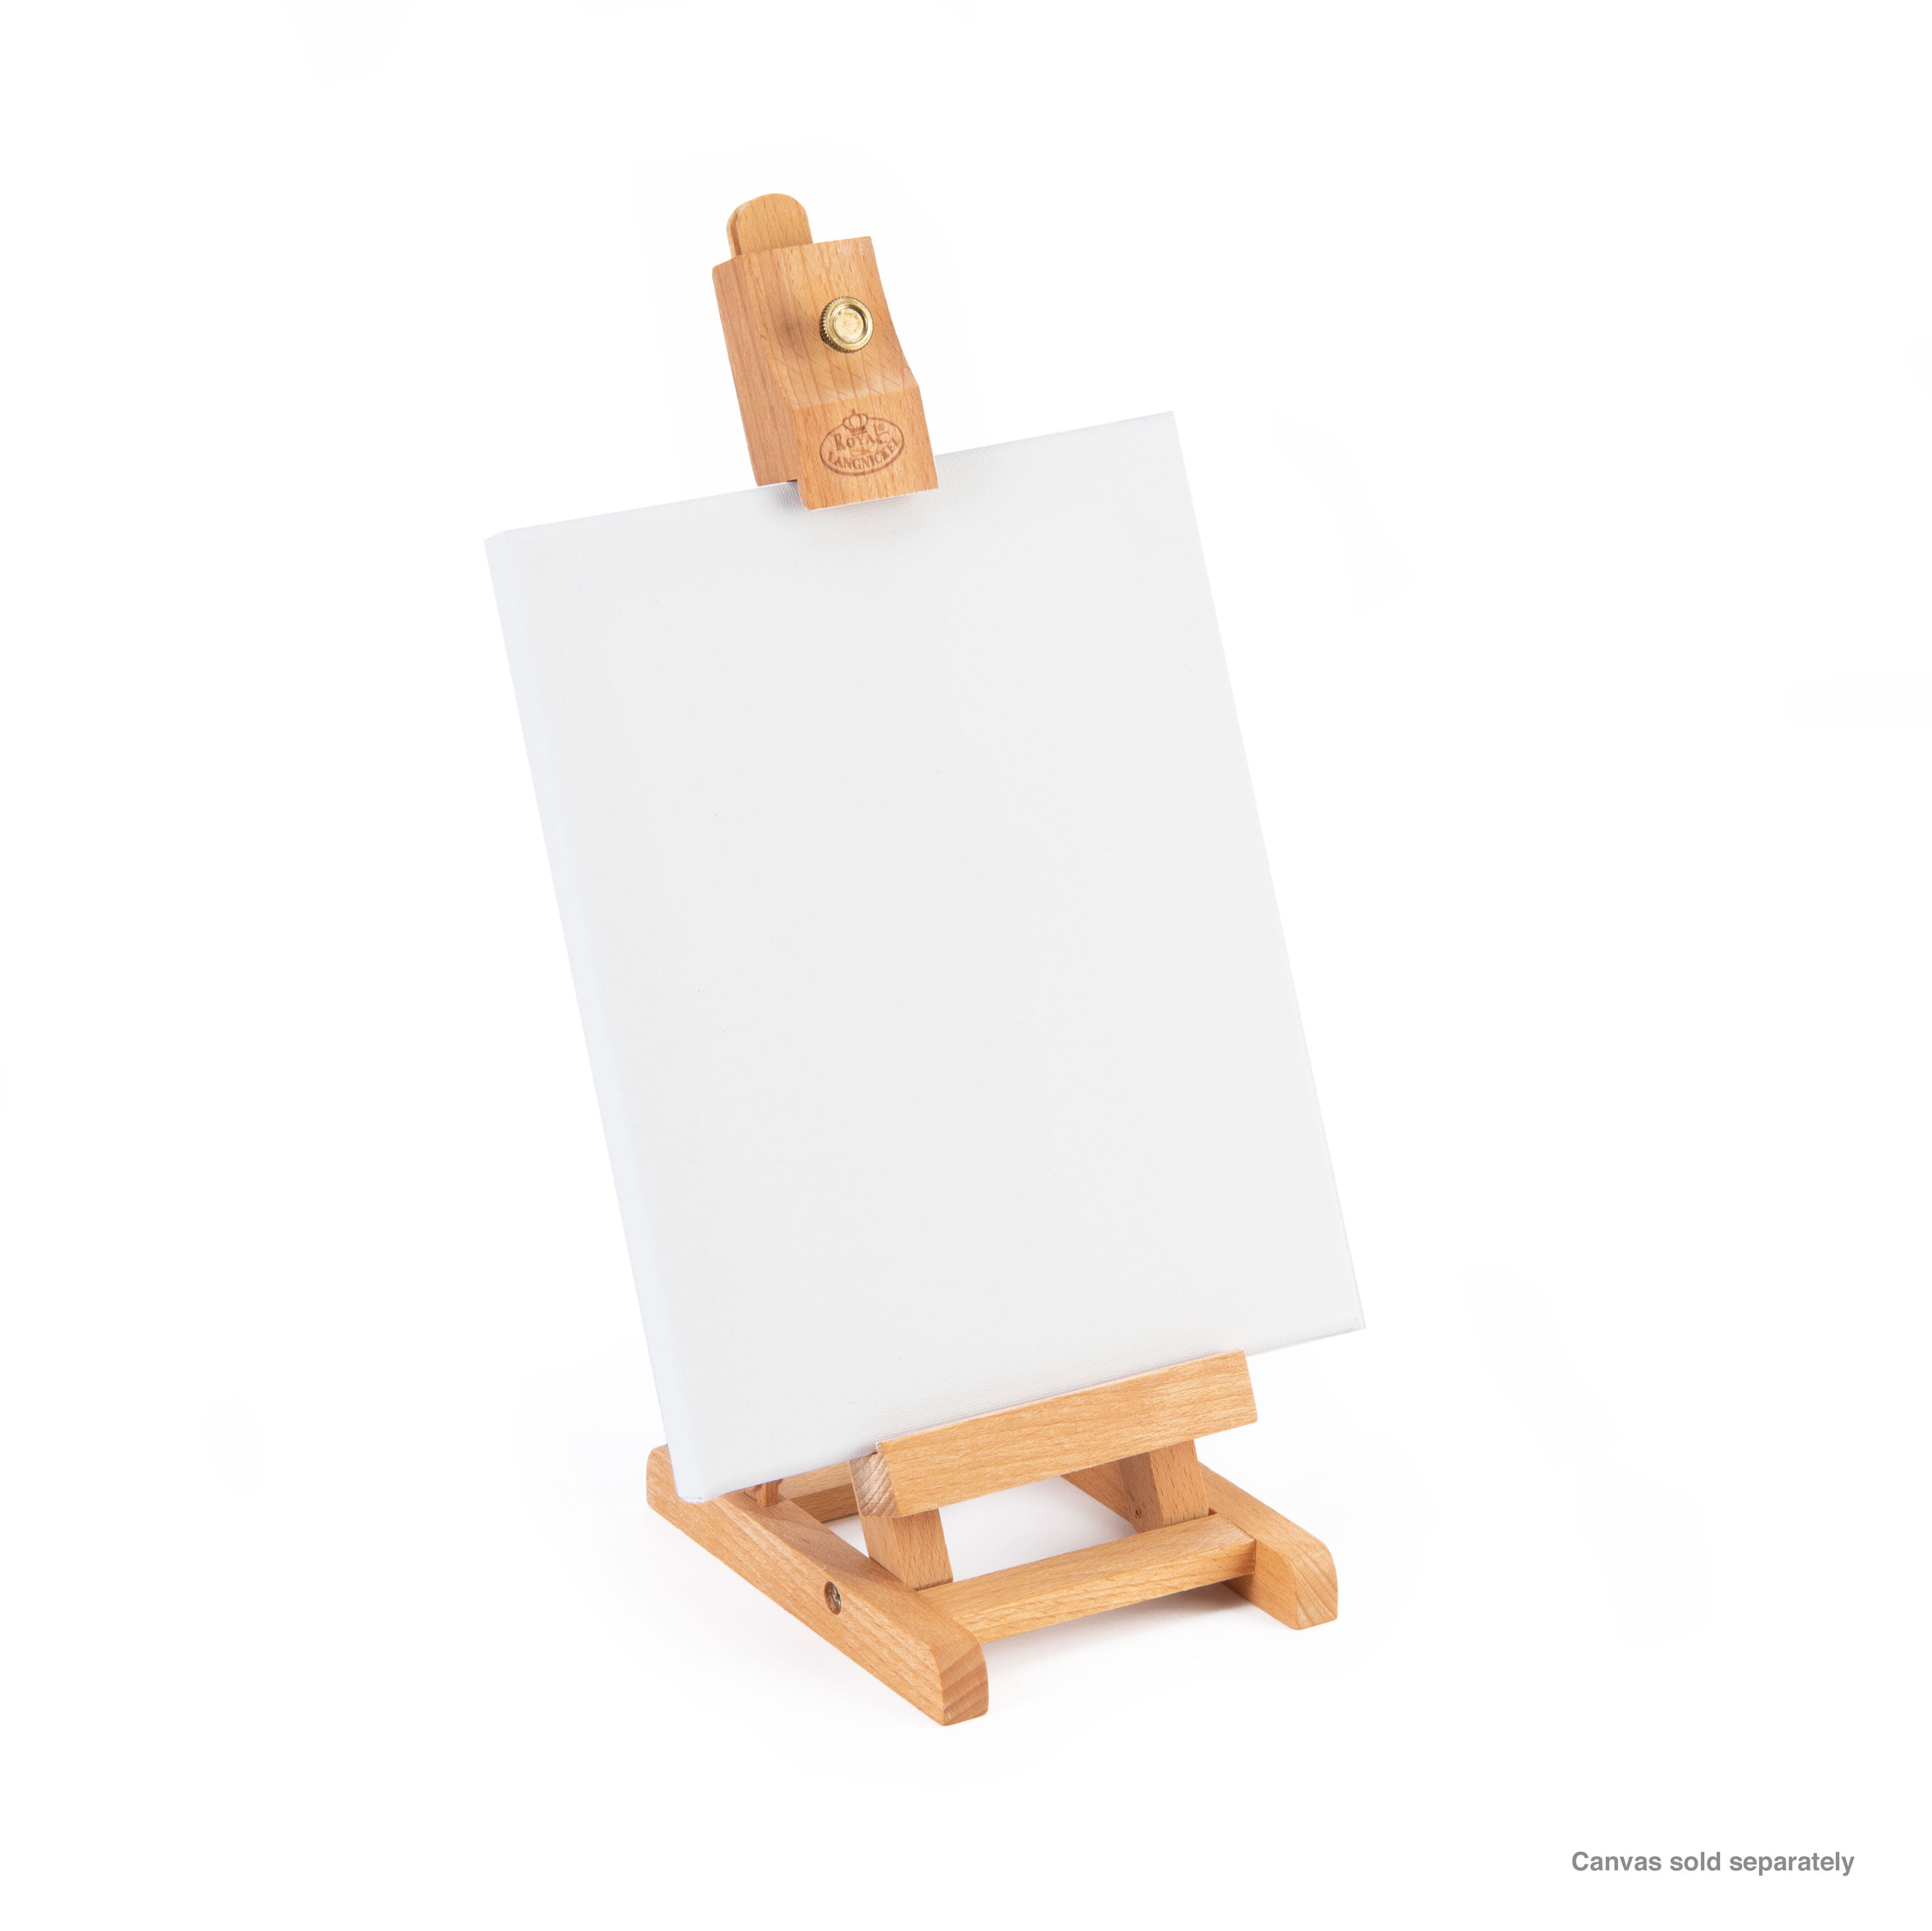 Royal & Langnickel Essentials Wood Mini Tabletop Easel, Painting, Drawing,  Tripod Display, Max 11 Canvas, 1pc 